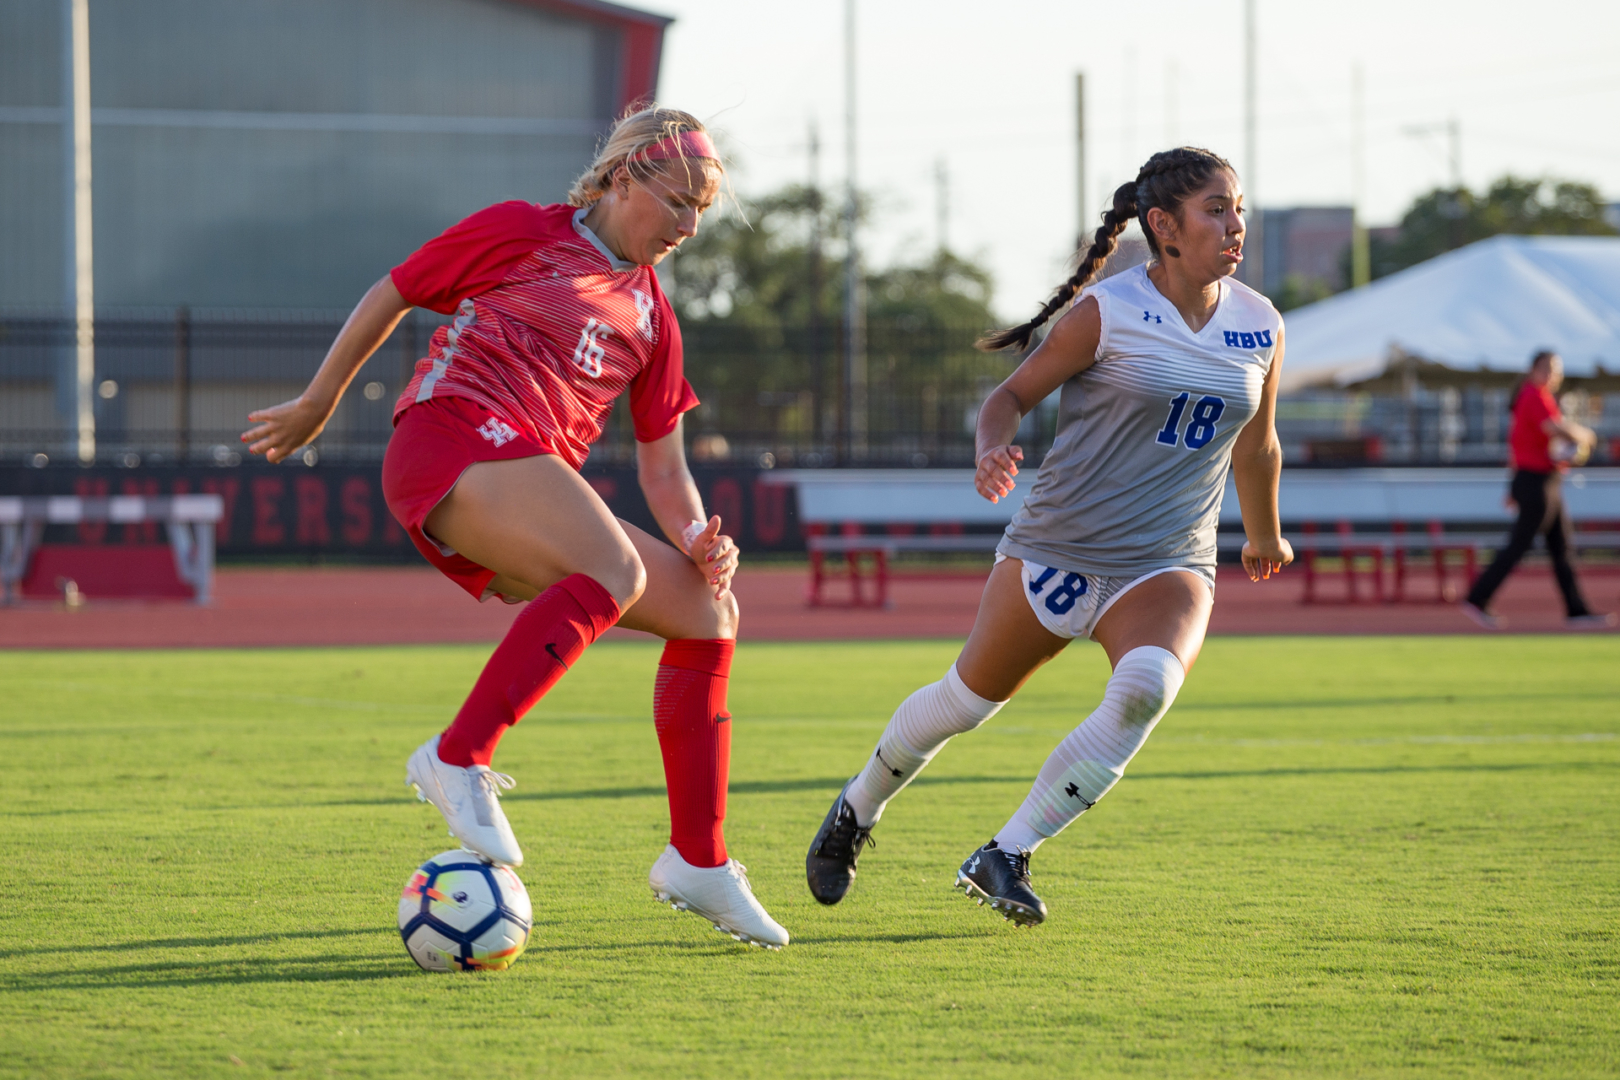 UH soccer Junior midfielder Mia Brascia is among veteran players returning to the team in 2019. | Trevor Nolley/The Cougar